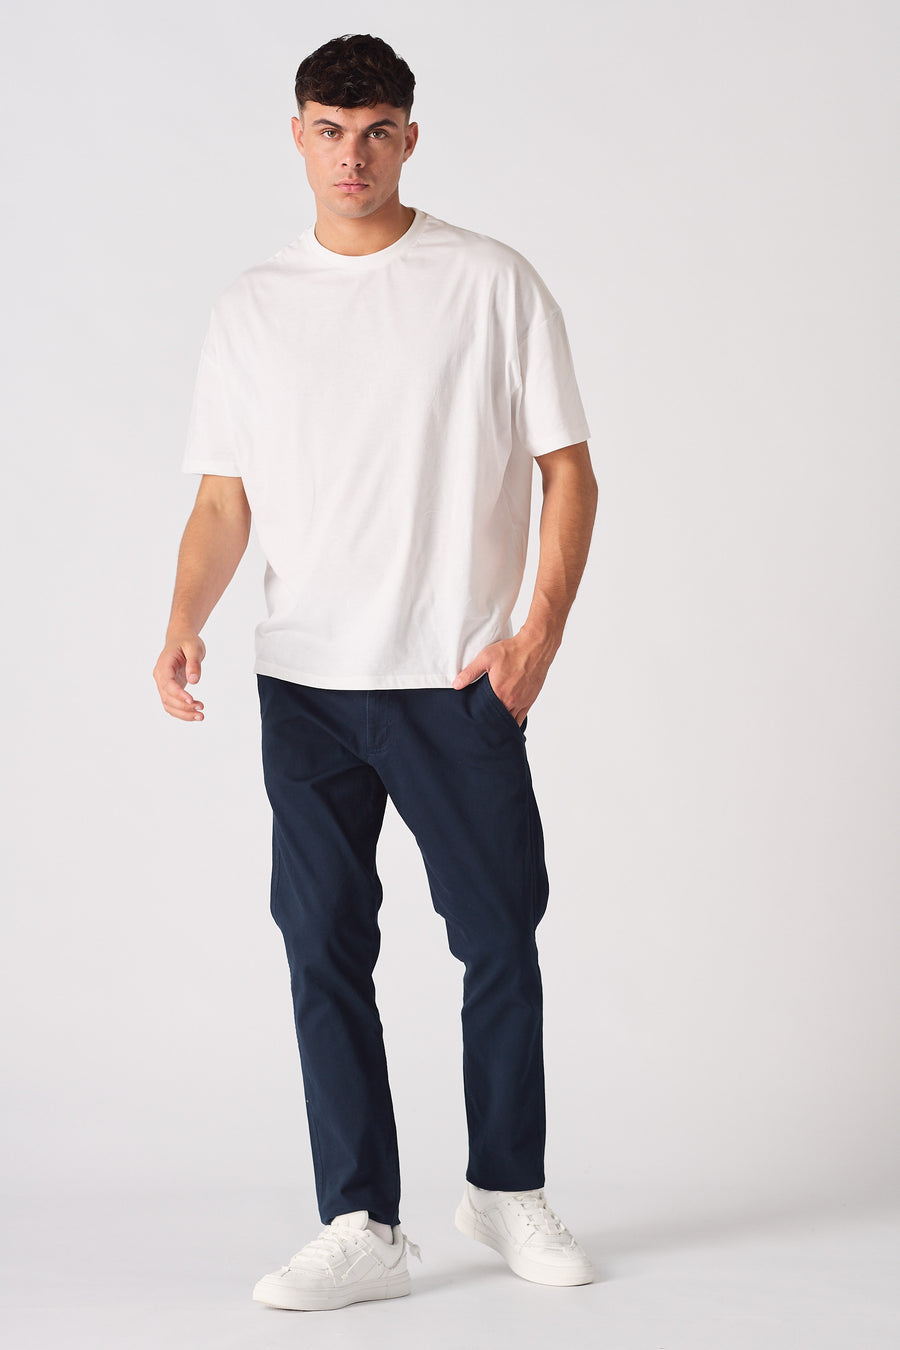 SLIM FIT CHINO TROUSER - NAVY BLUE